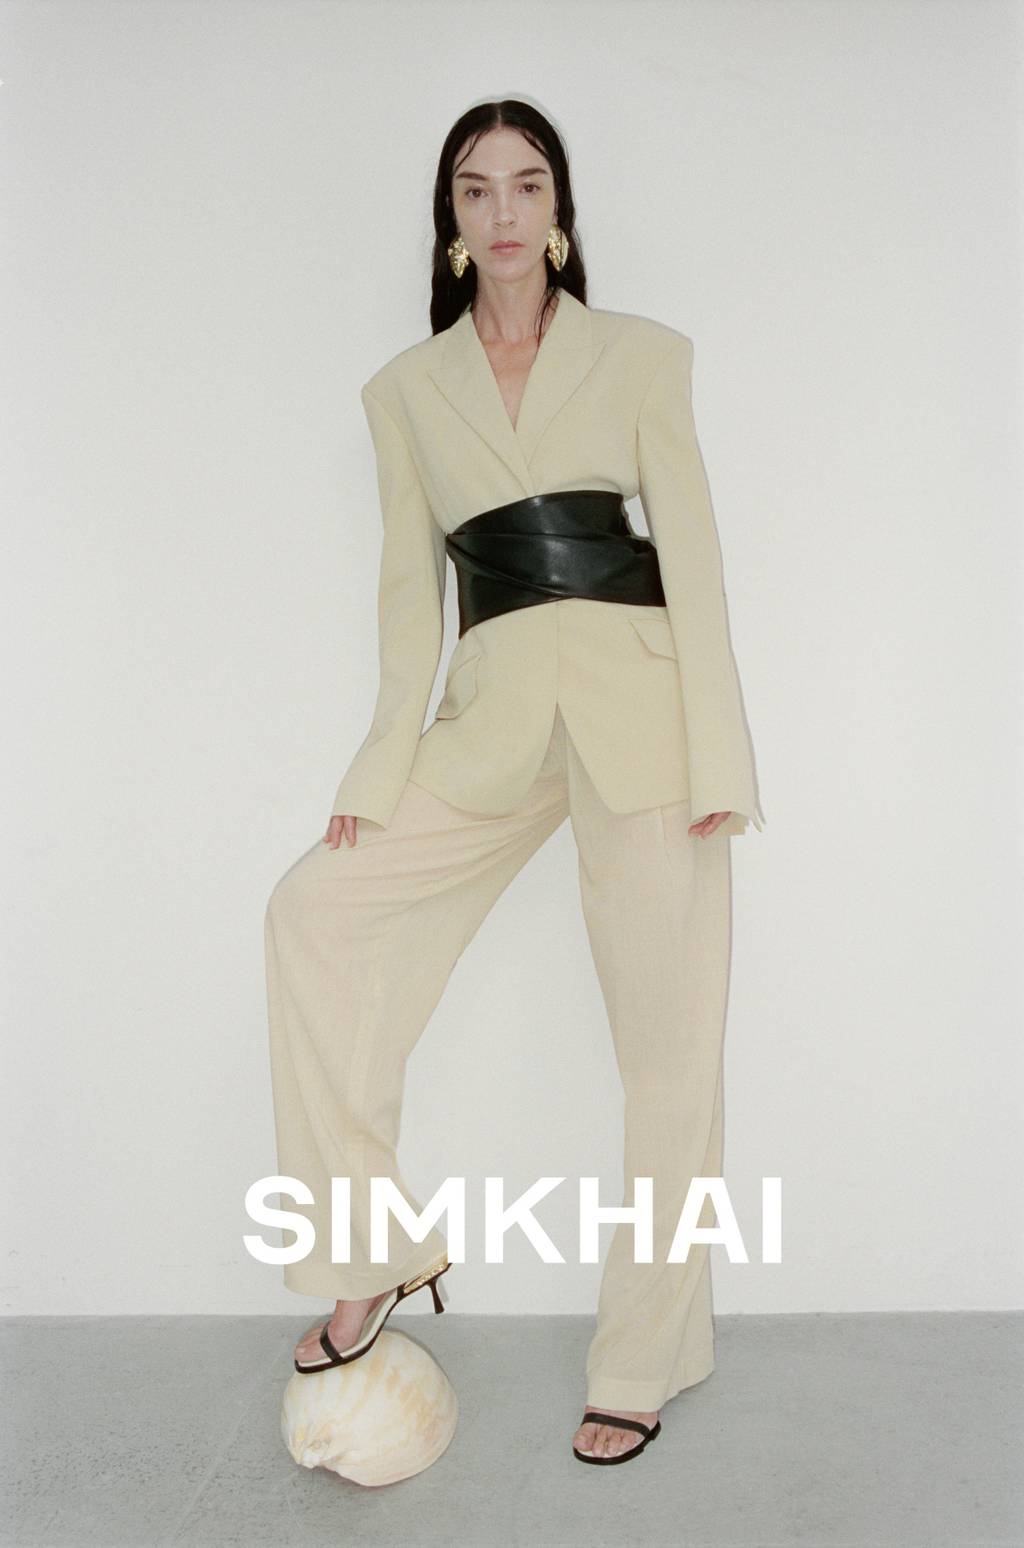 Jonathan Simkhai will present his Fall/Winter 2023 collection at New York Fashion Week on Friday.